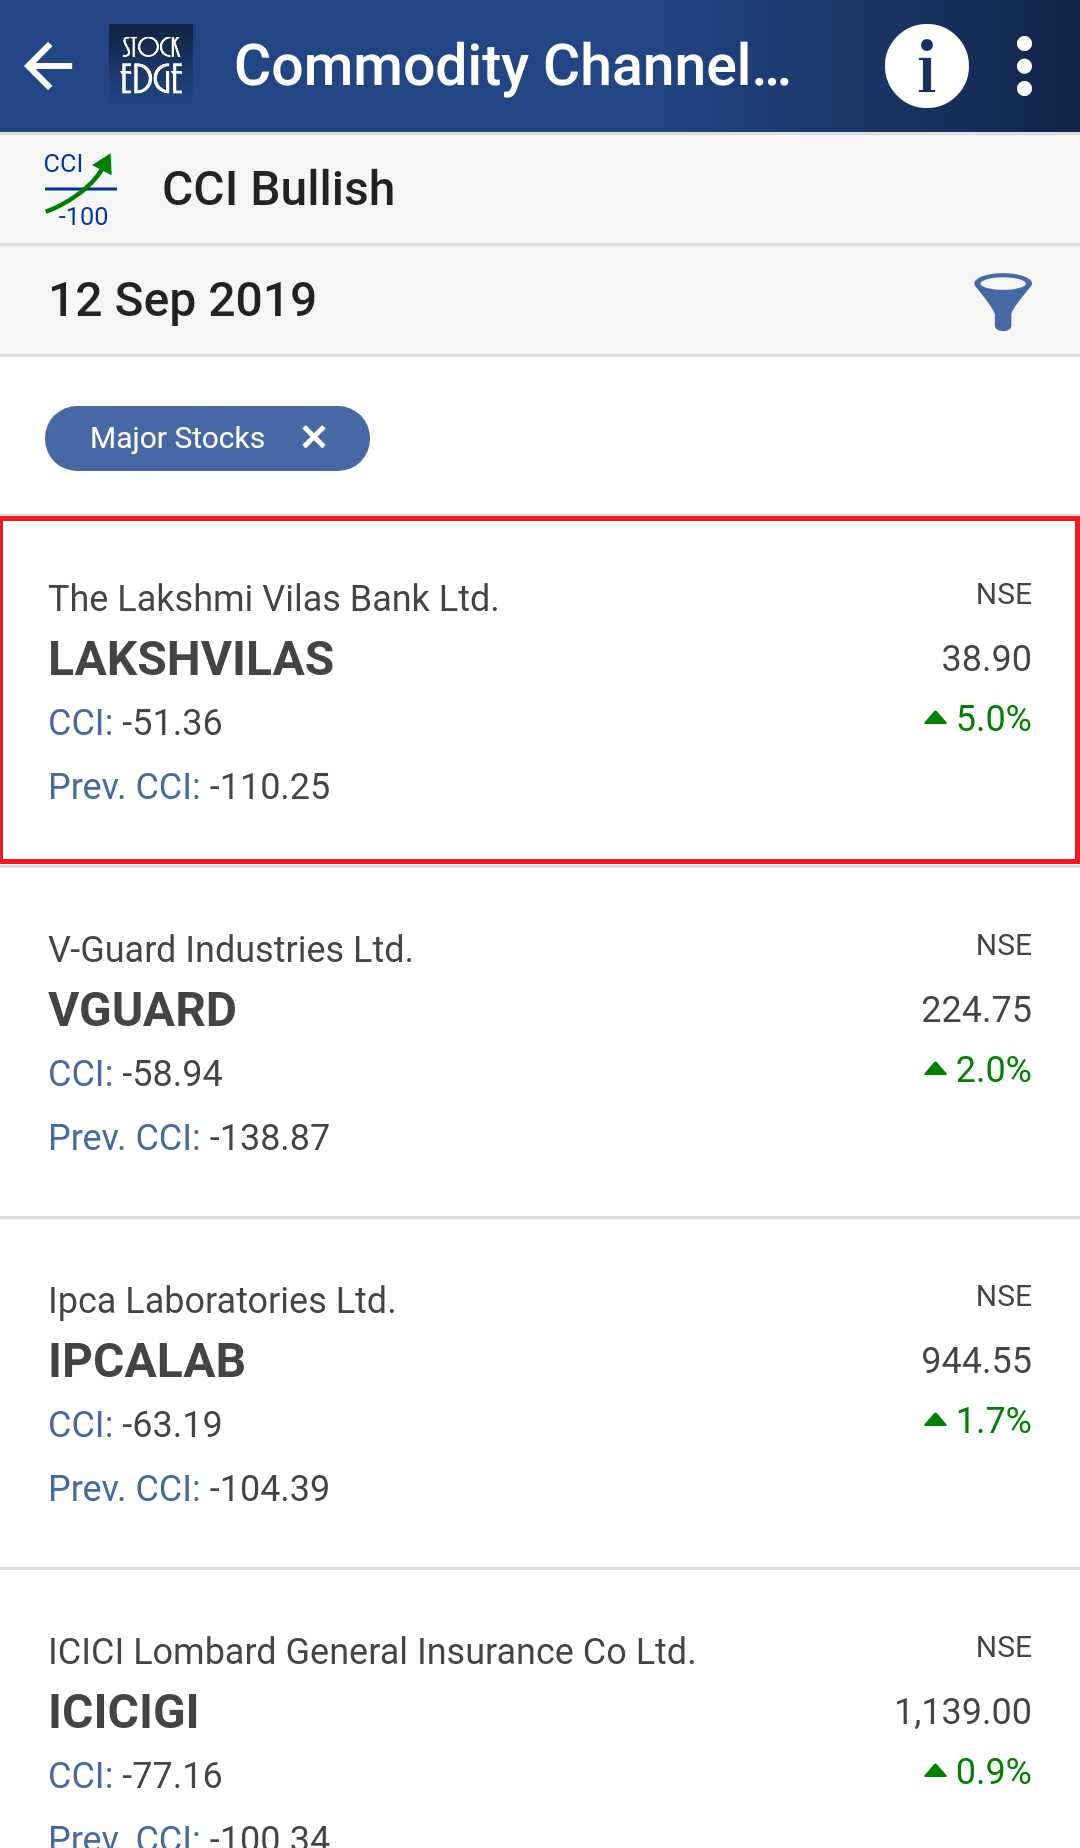 A list of cci in bullish trend of various stocks as of 12 sep-2019.